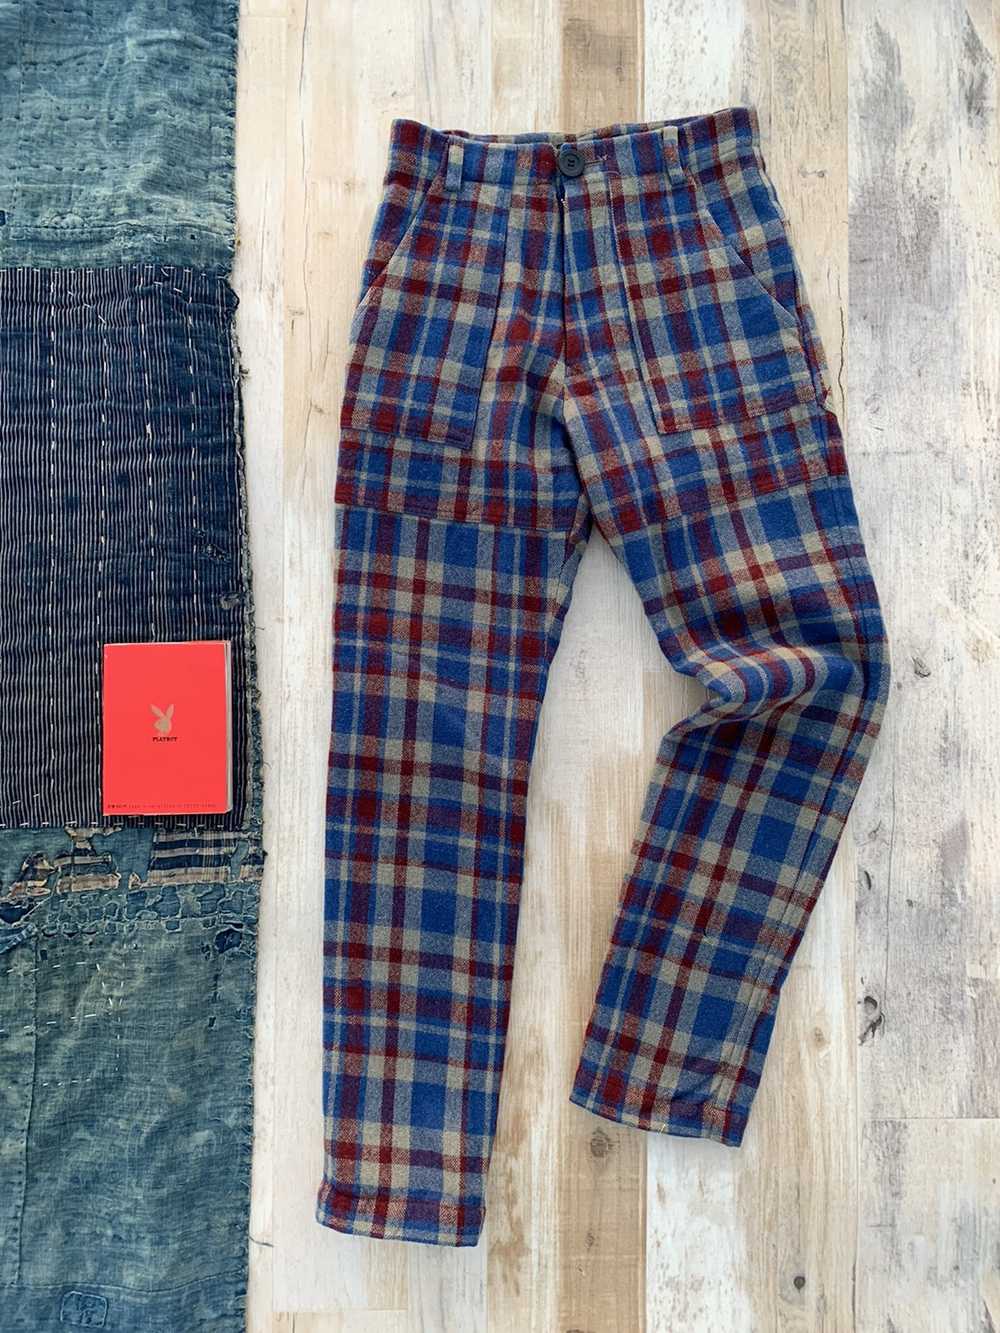 Undercover AW96 Wire Wool Plaid Pants - image 1